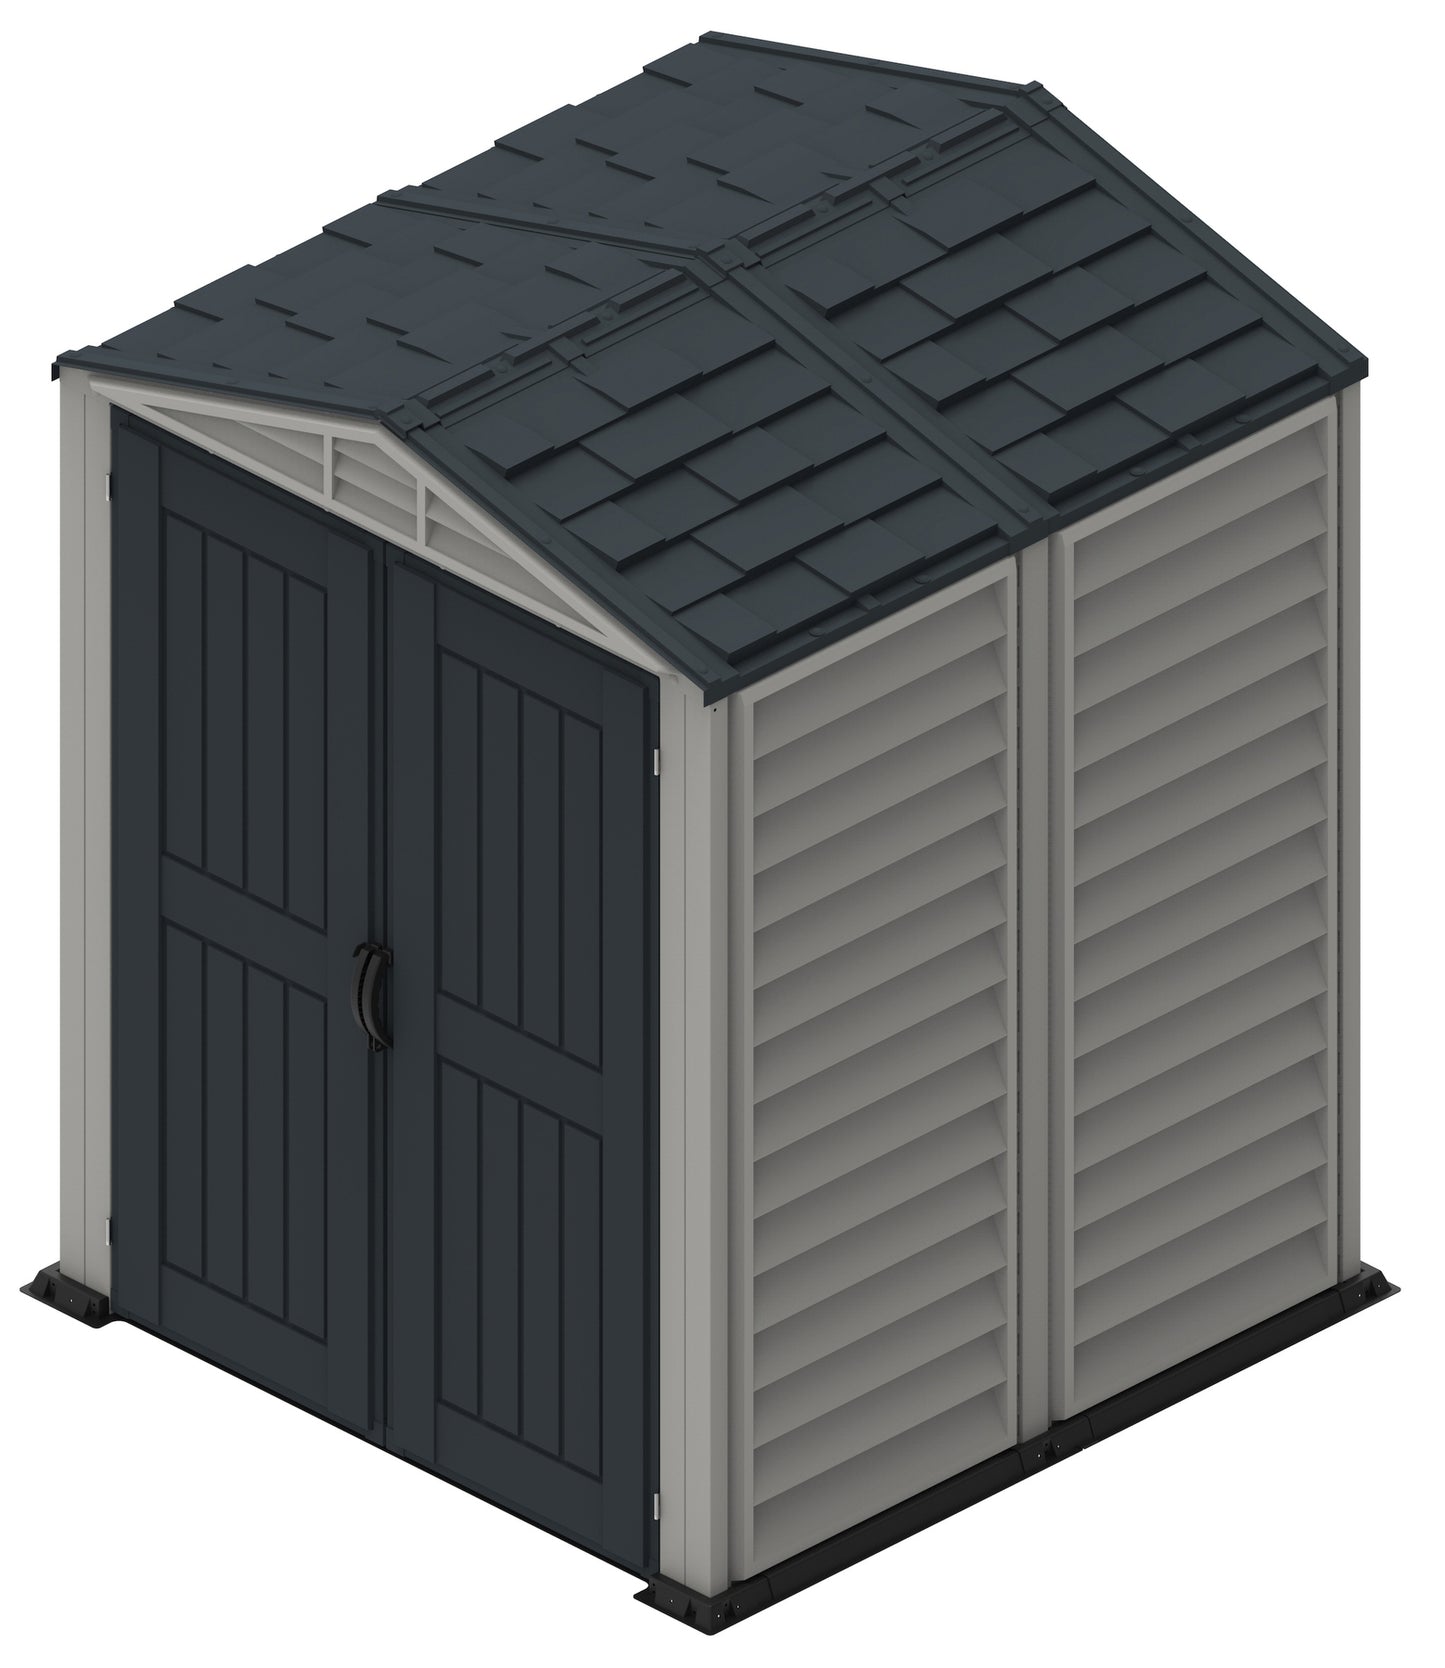 Duramax YardMate Plus 5 ft. 6 in. x 5ft. 6 in. Gray Vinyl Storage Shed with Molded Floor